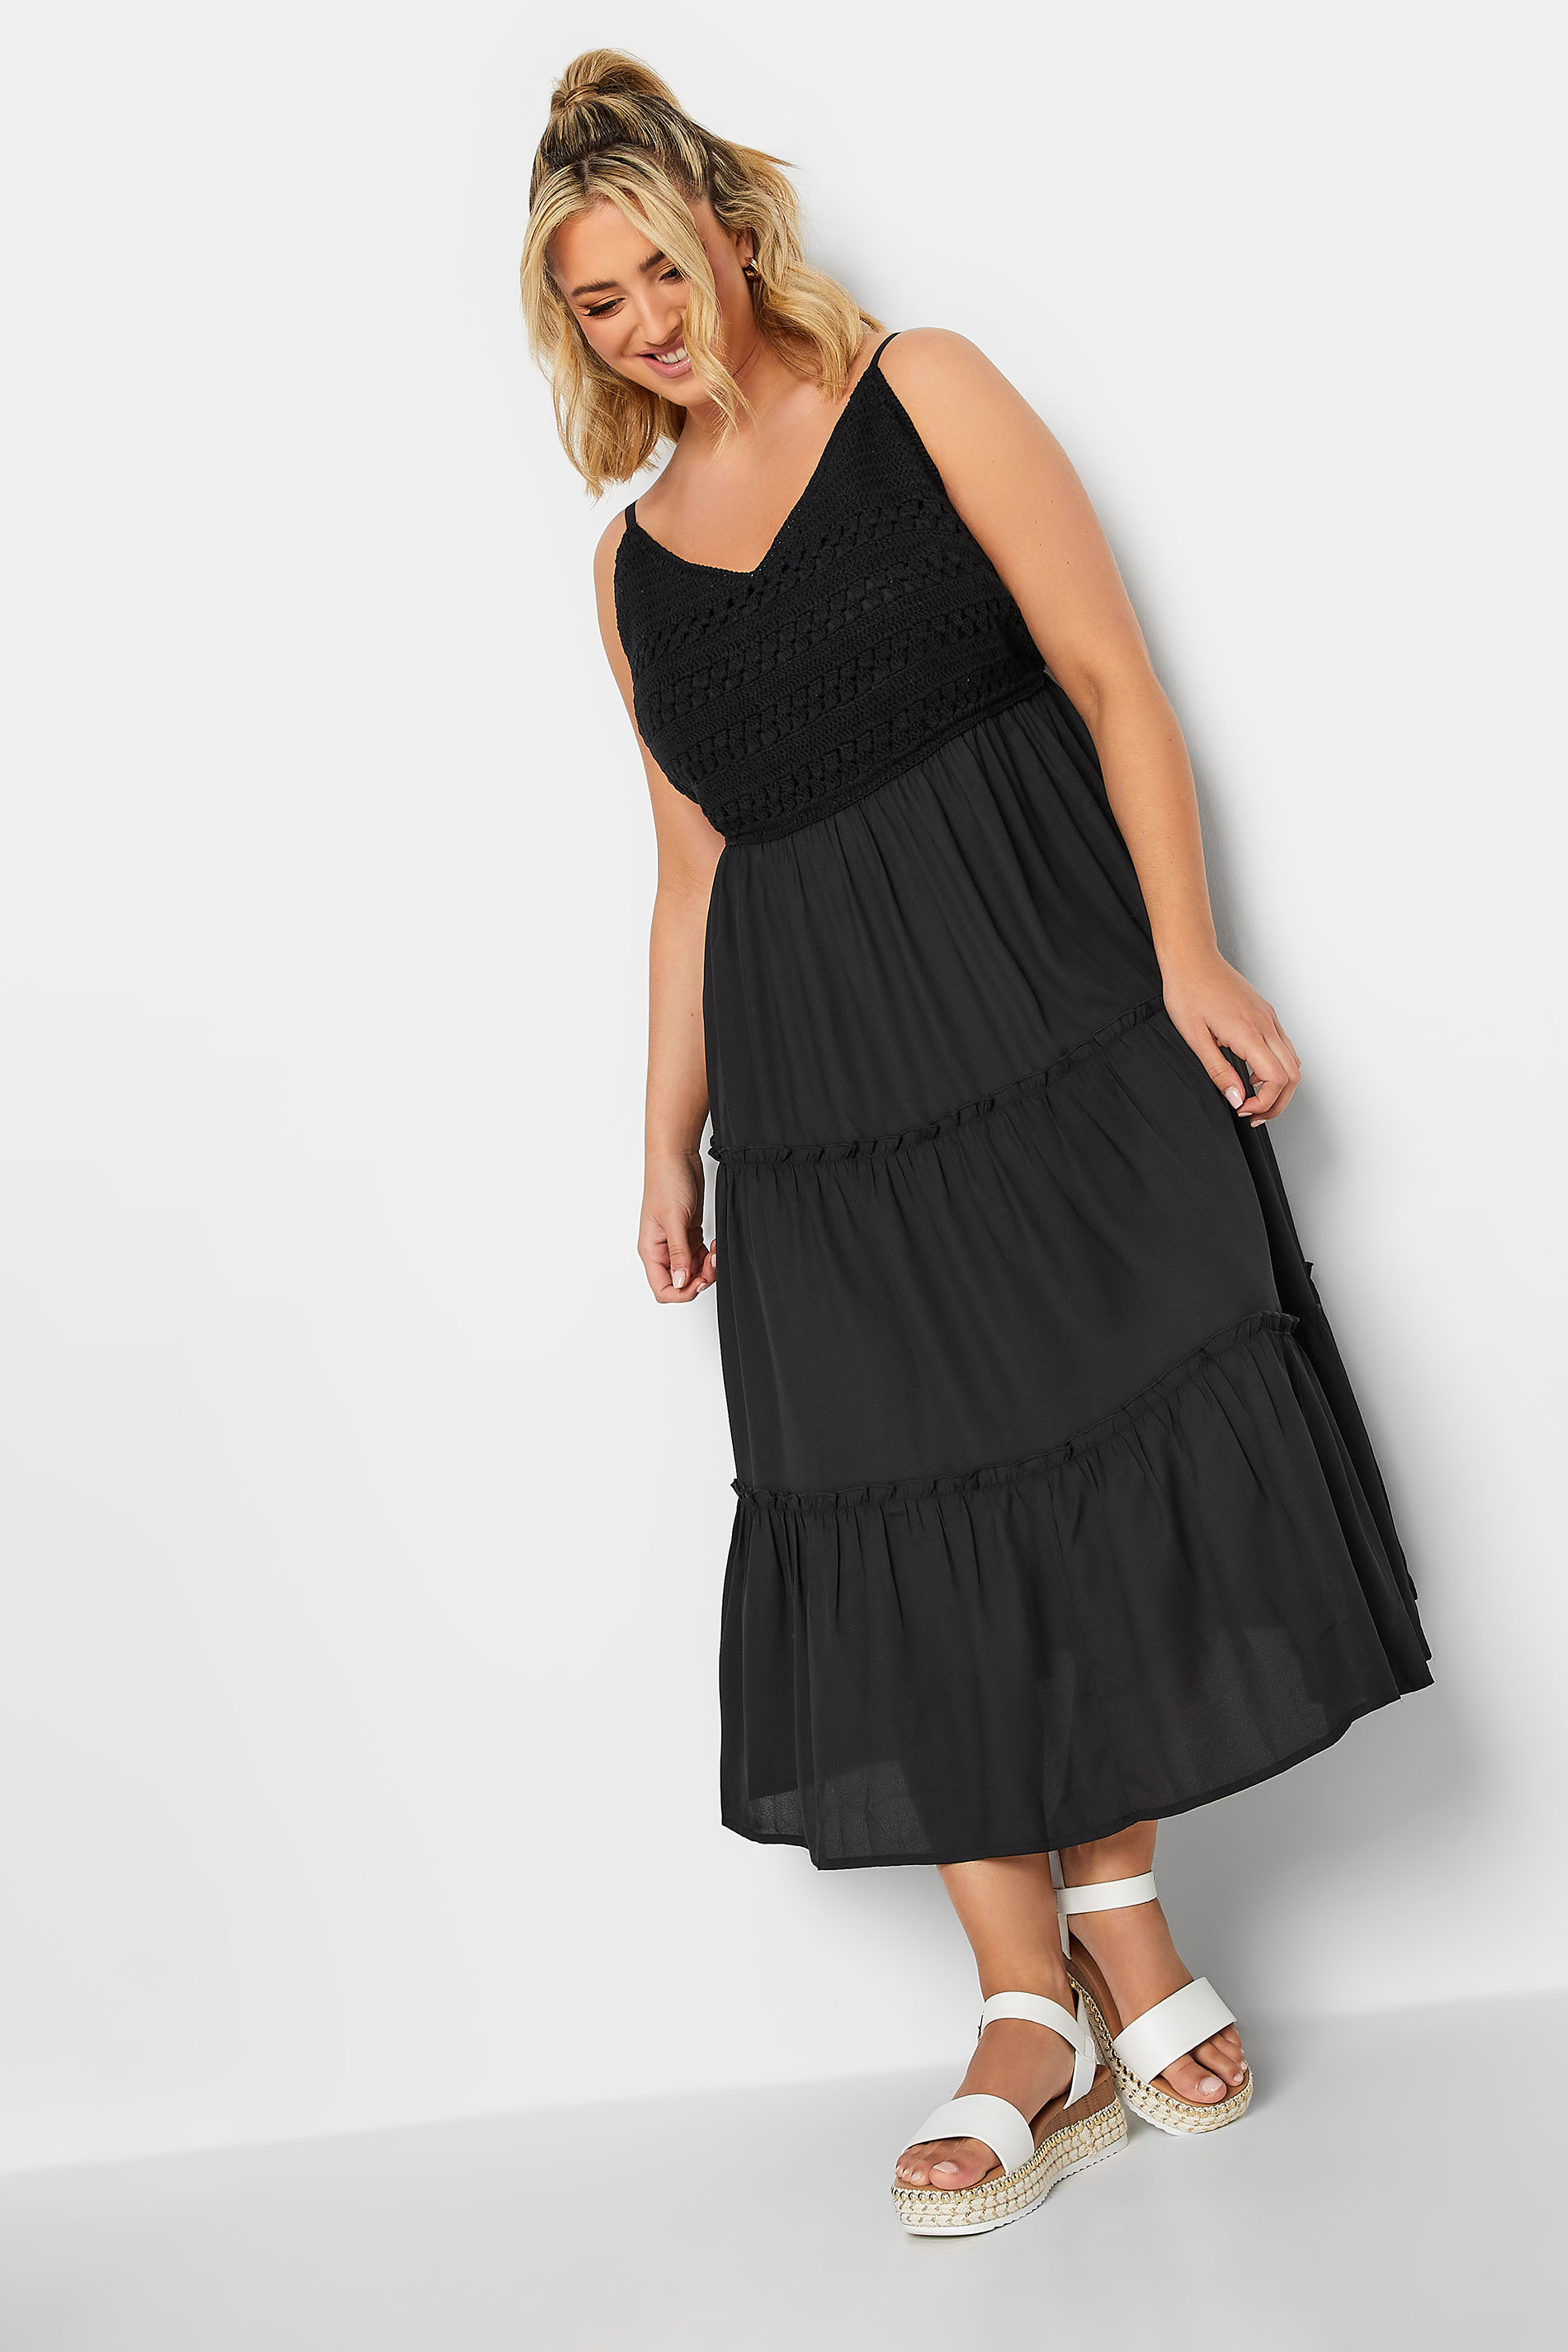 LIMITED COLLECTION Plus Size Black Crochet Tiered Midaxi Dress | Yours Clothing  1